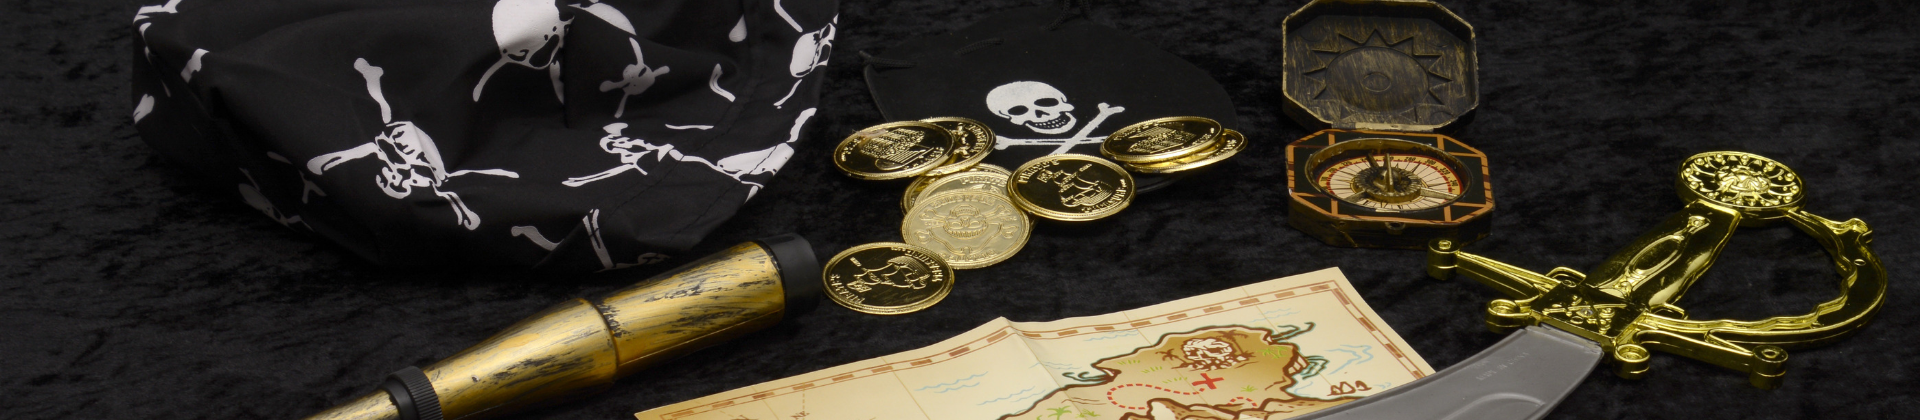 The Thrill of the Chase Treasure Hunt: Six Questions with HappyThoth